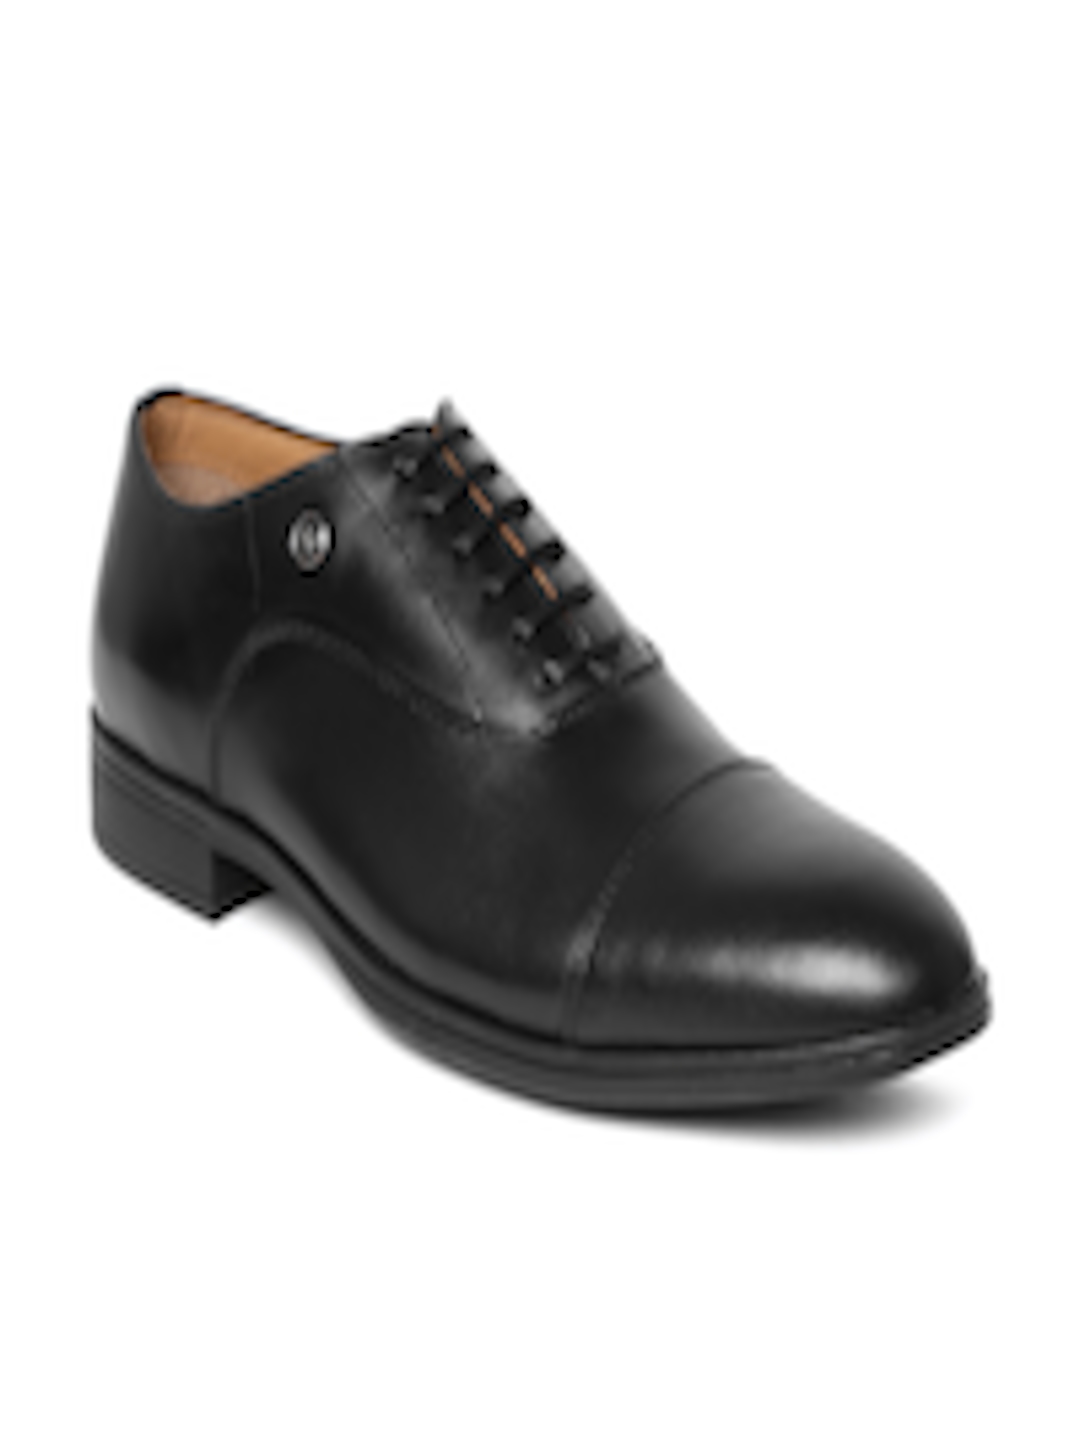 Buy Louis Philippe Men Black Leather Formal Oxfords - Formal Shoes for Men 9450683 | Myntra